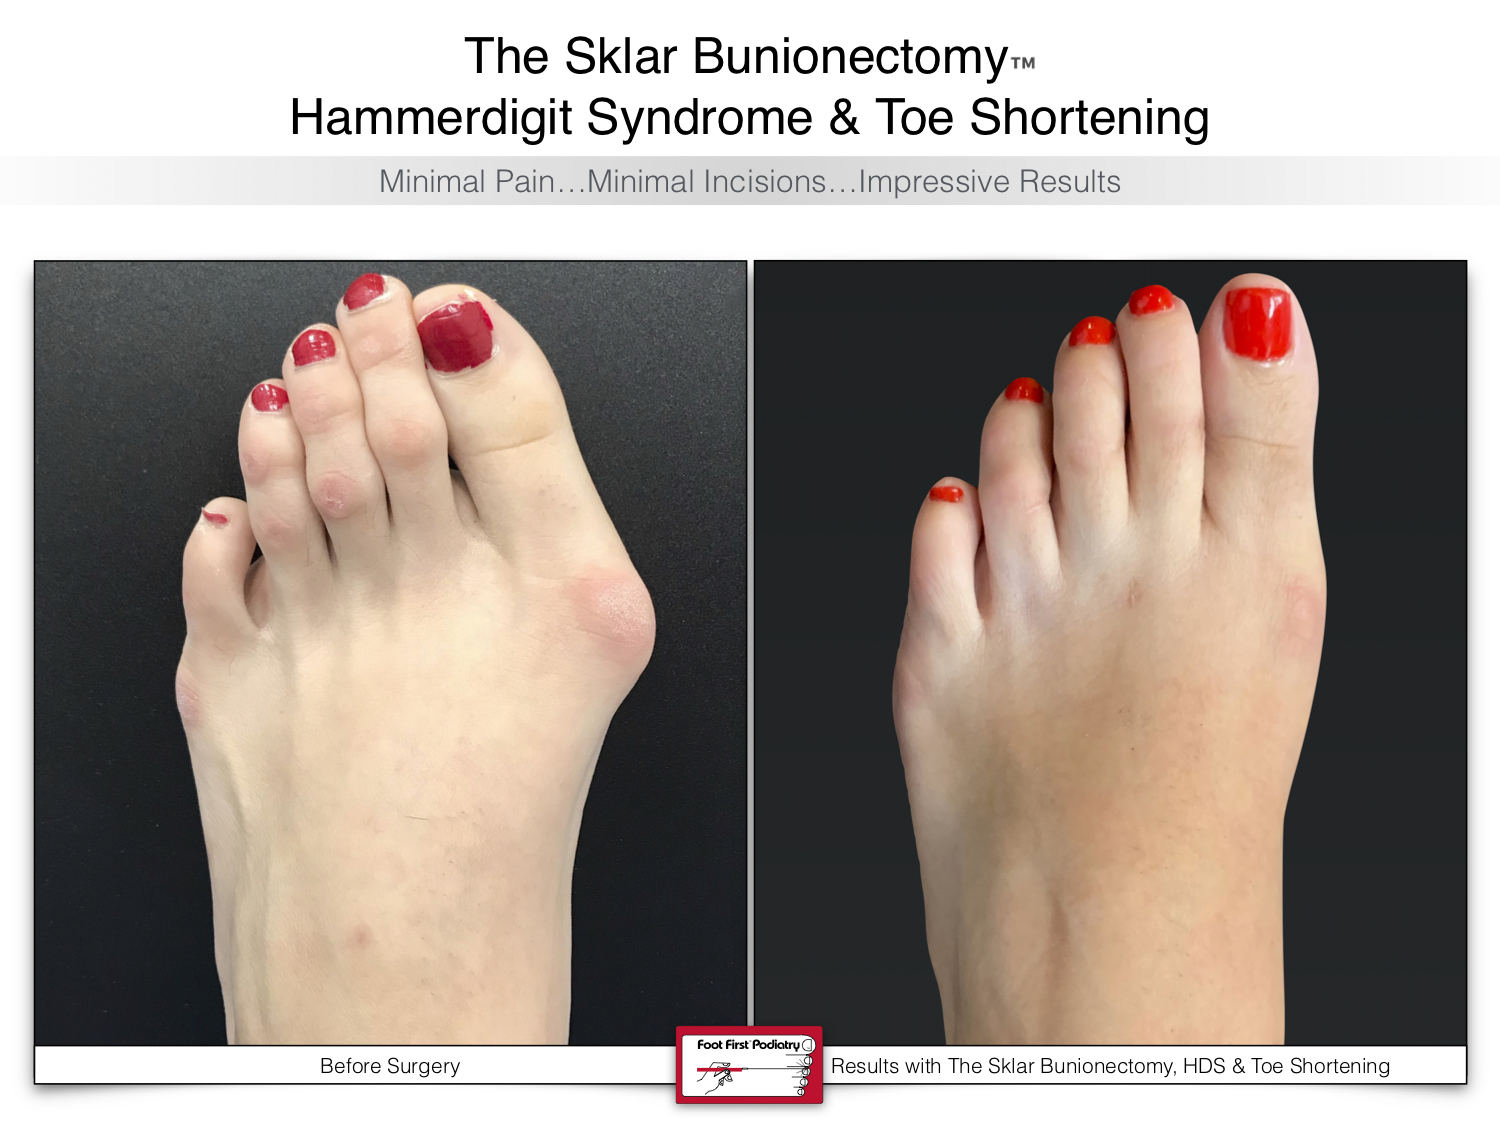 www.footfirst.com | Cosmetic Bunion and Toe Shortening Surgery 131.jpg